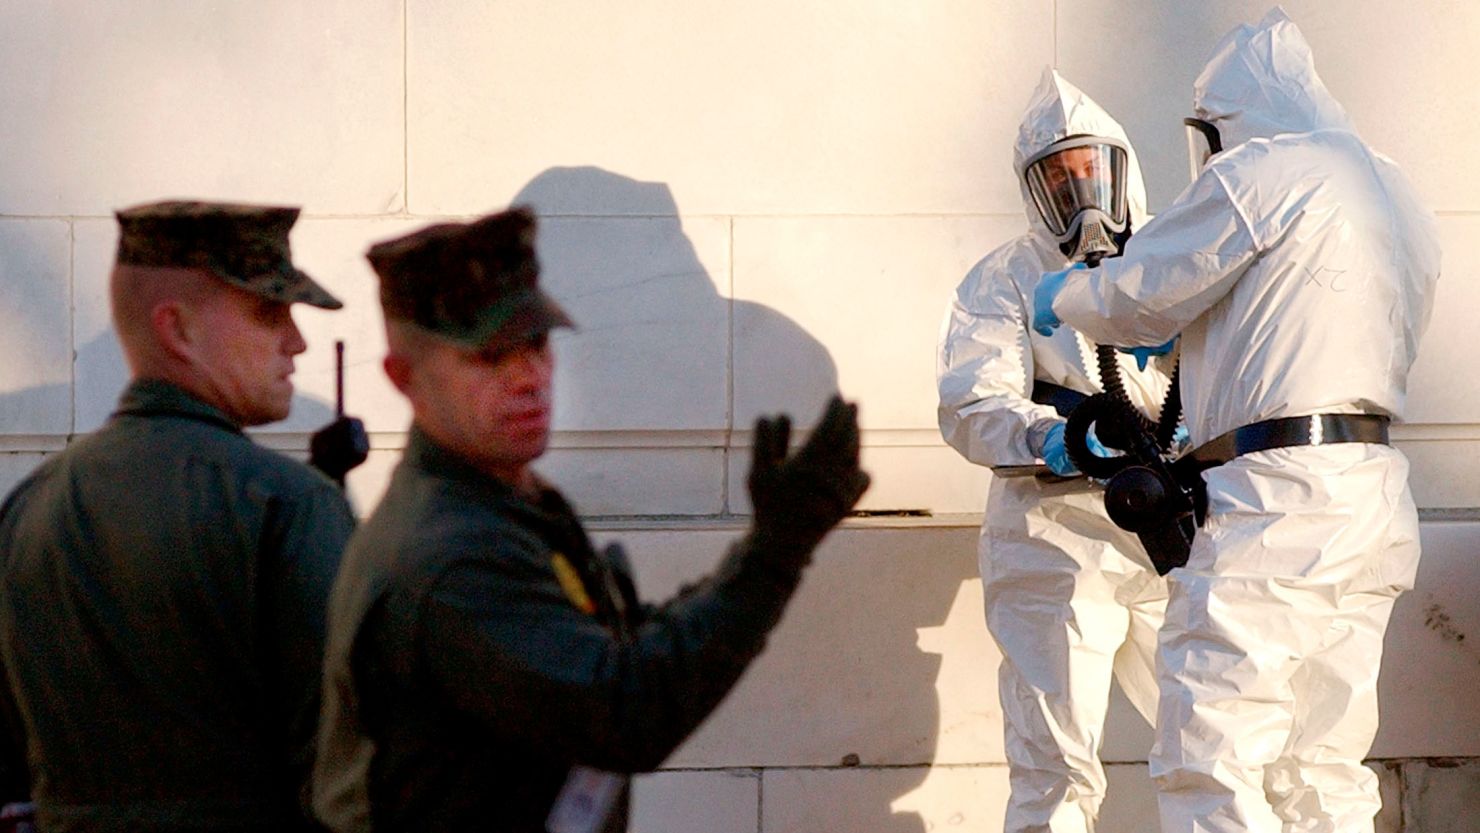 U.S. Marines and workers in protective suits prepare to enter the closed Russell Senate Office Building on Capitol Hill on Feb. 4, 2004.